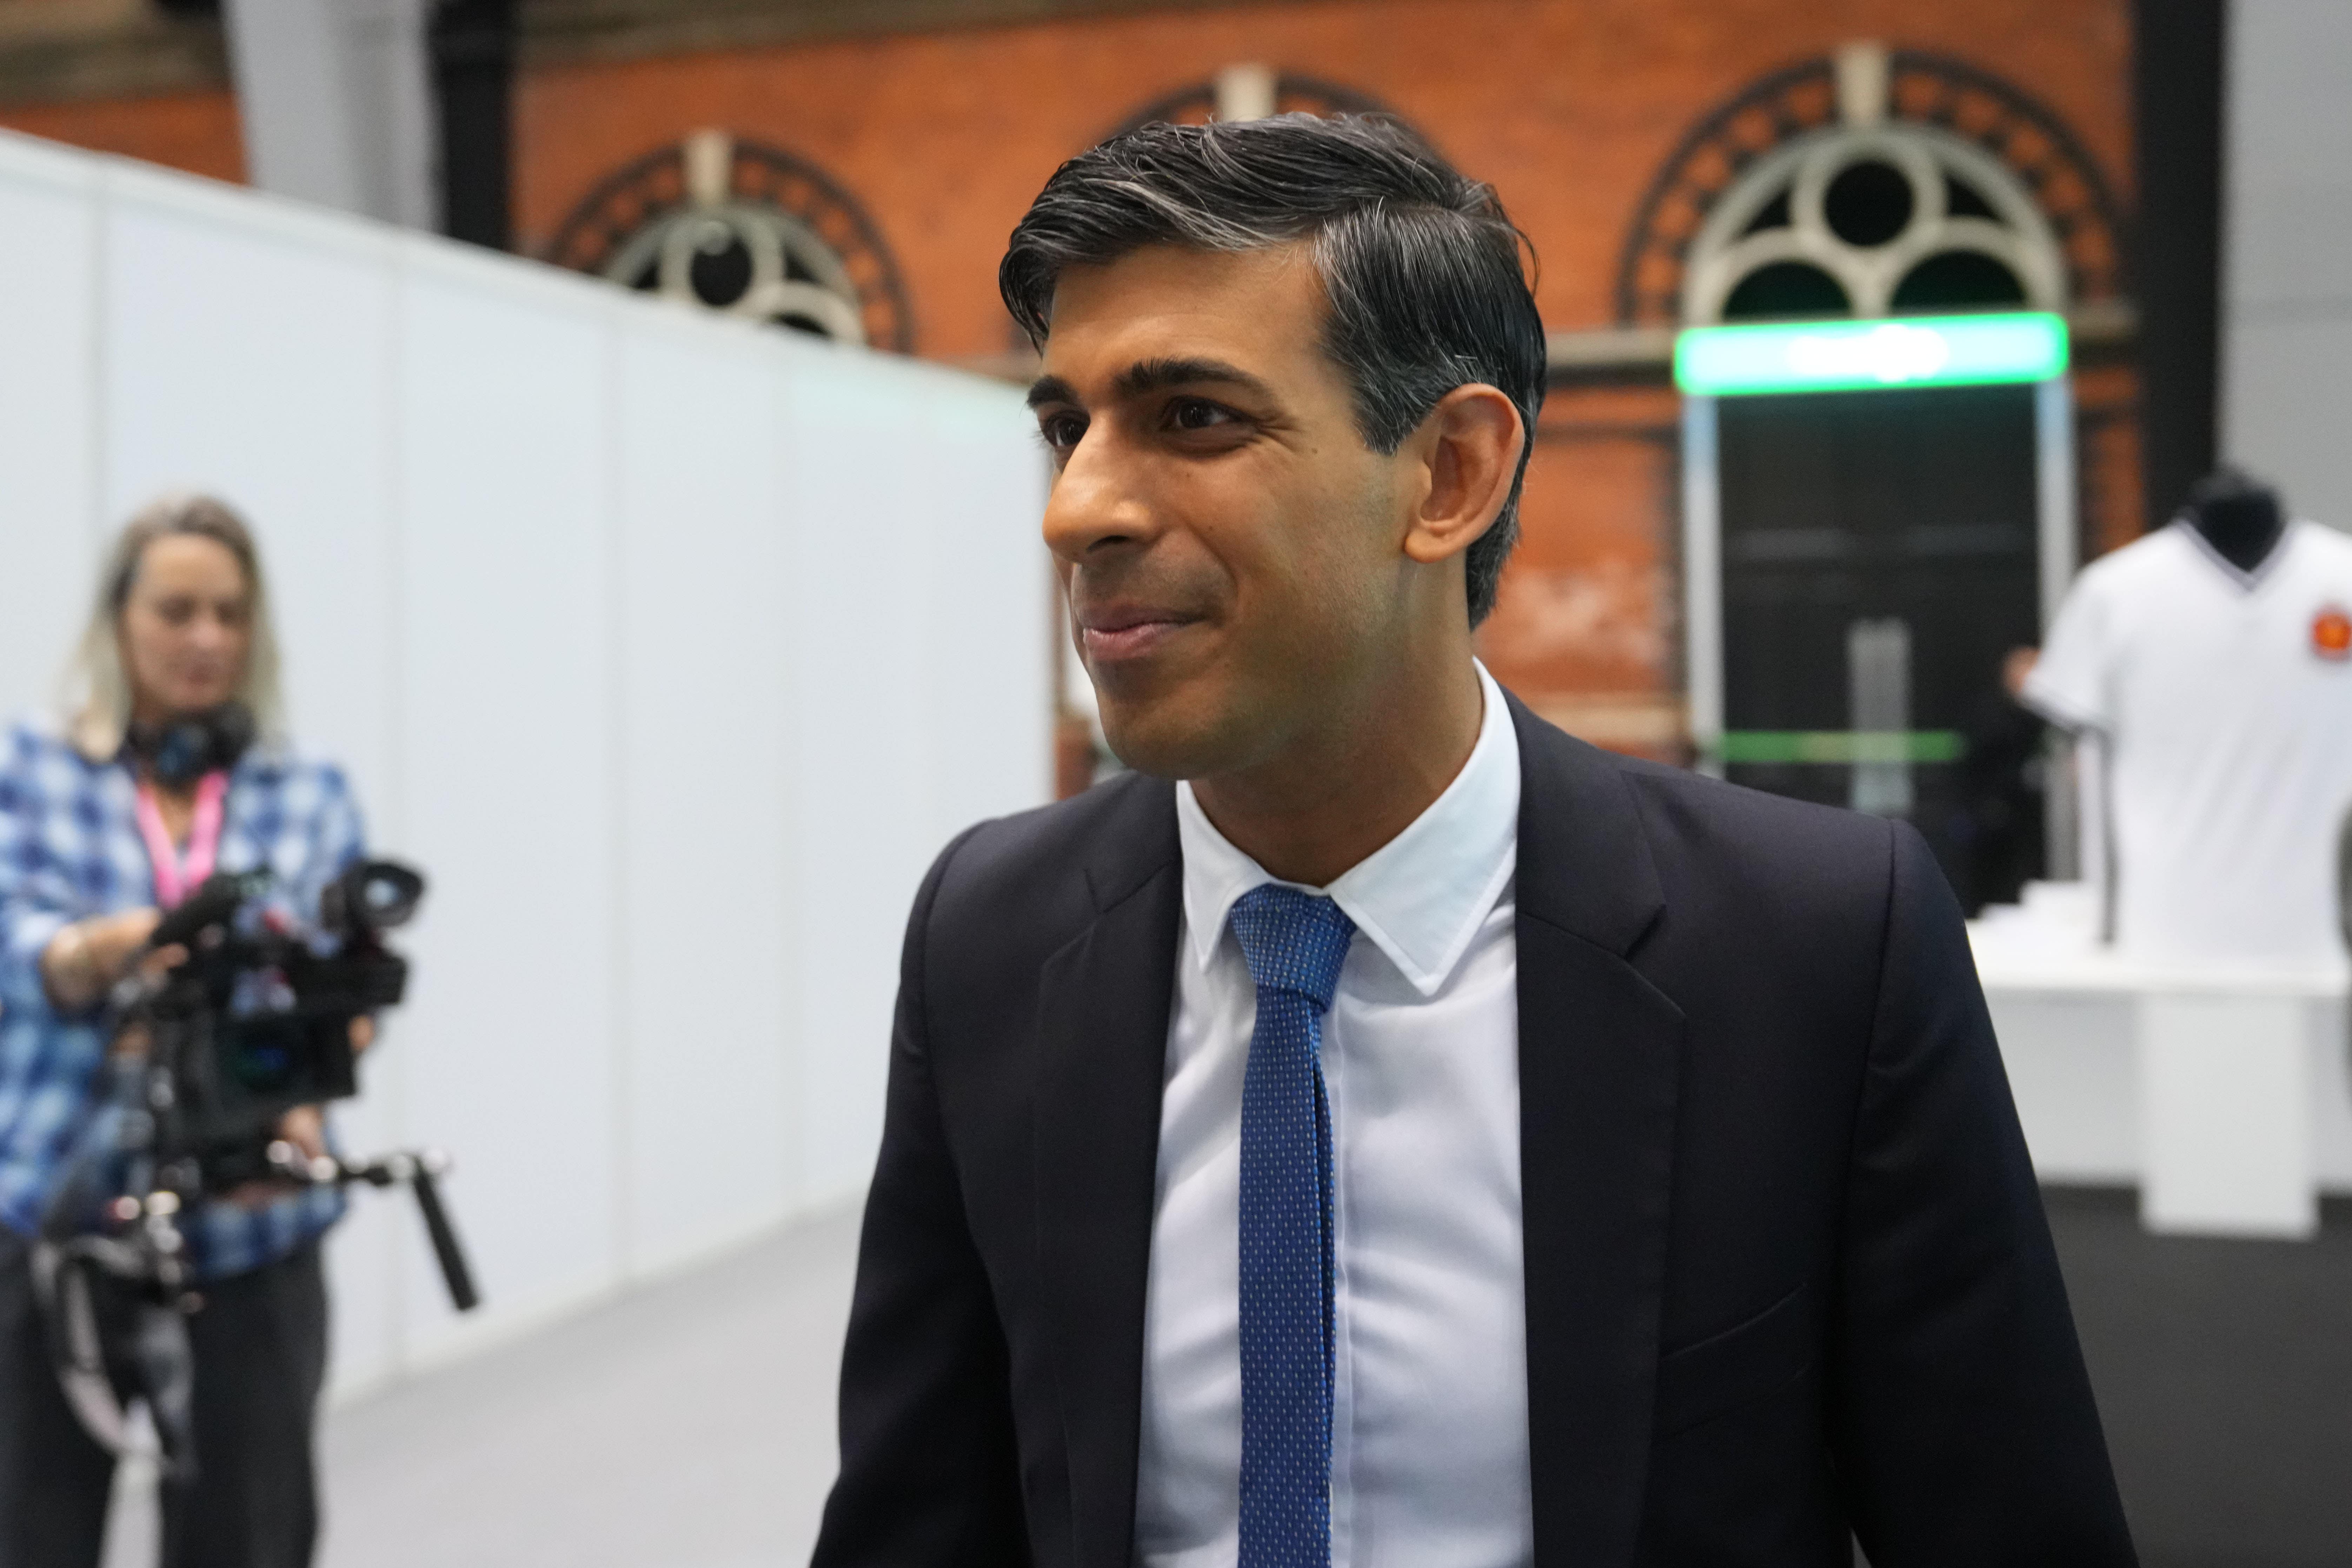 Rishi Sunak tours the Manchester Central convention complex